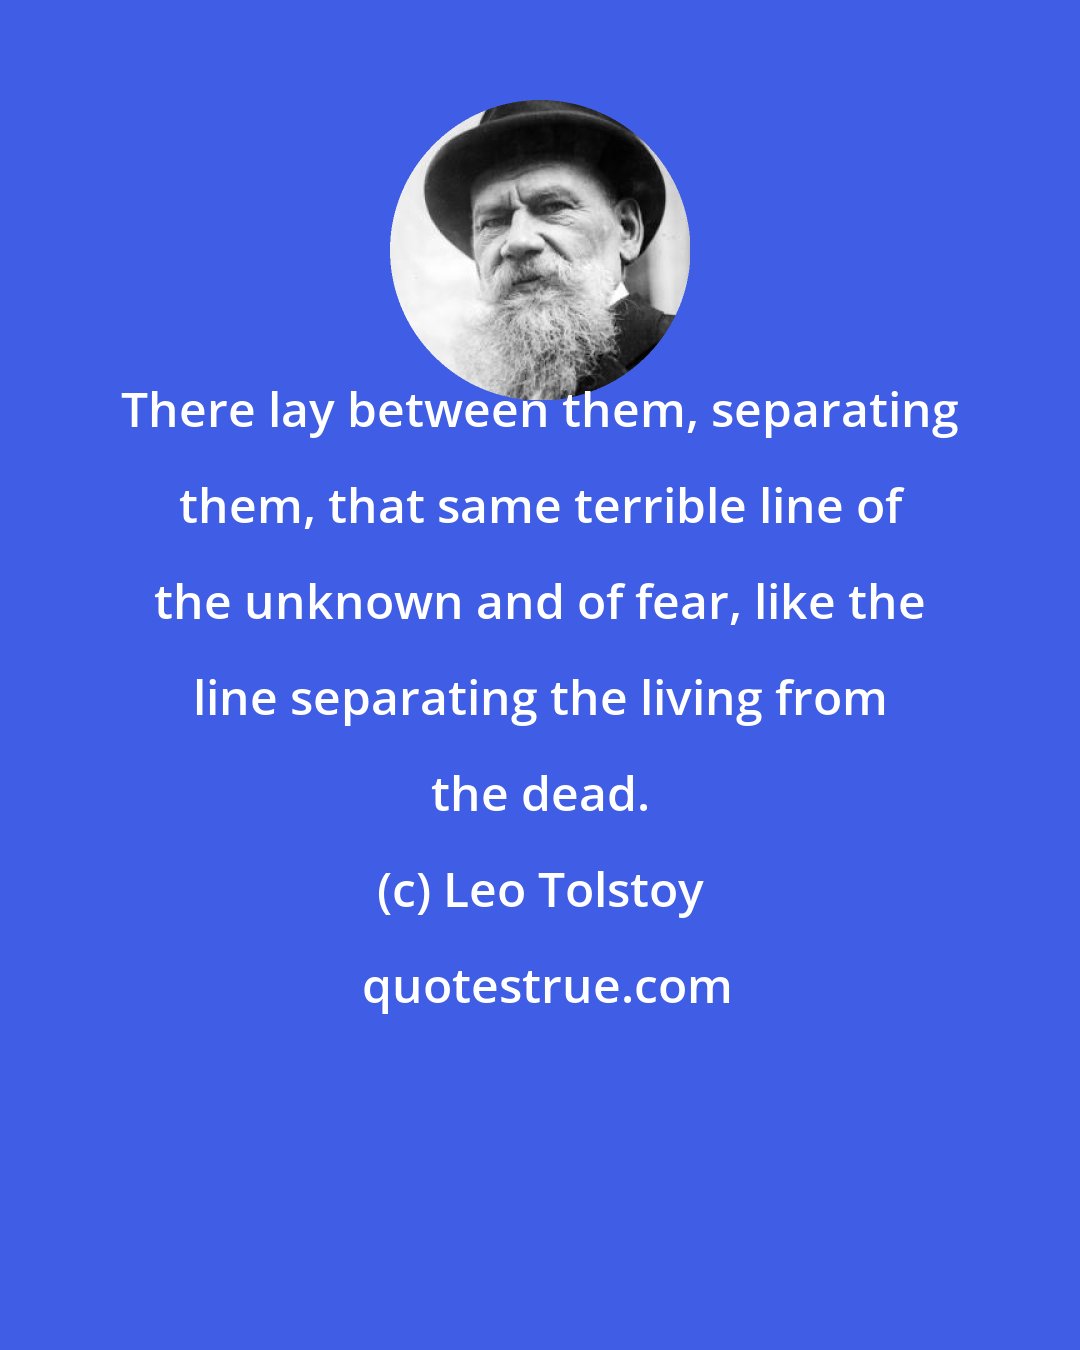 Leo Tolstoy: There lay between them, separating them, that same terrible line of the unknown and of fear, like the line separating the living from the dead.